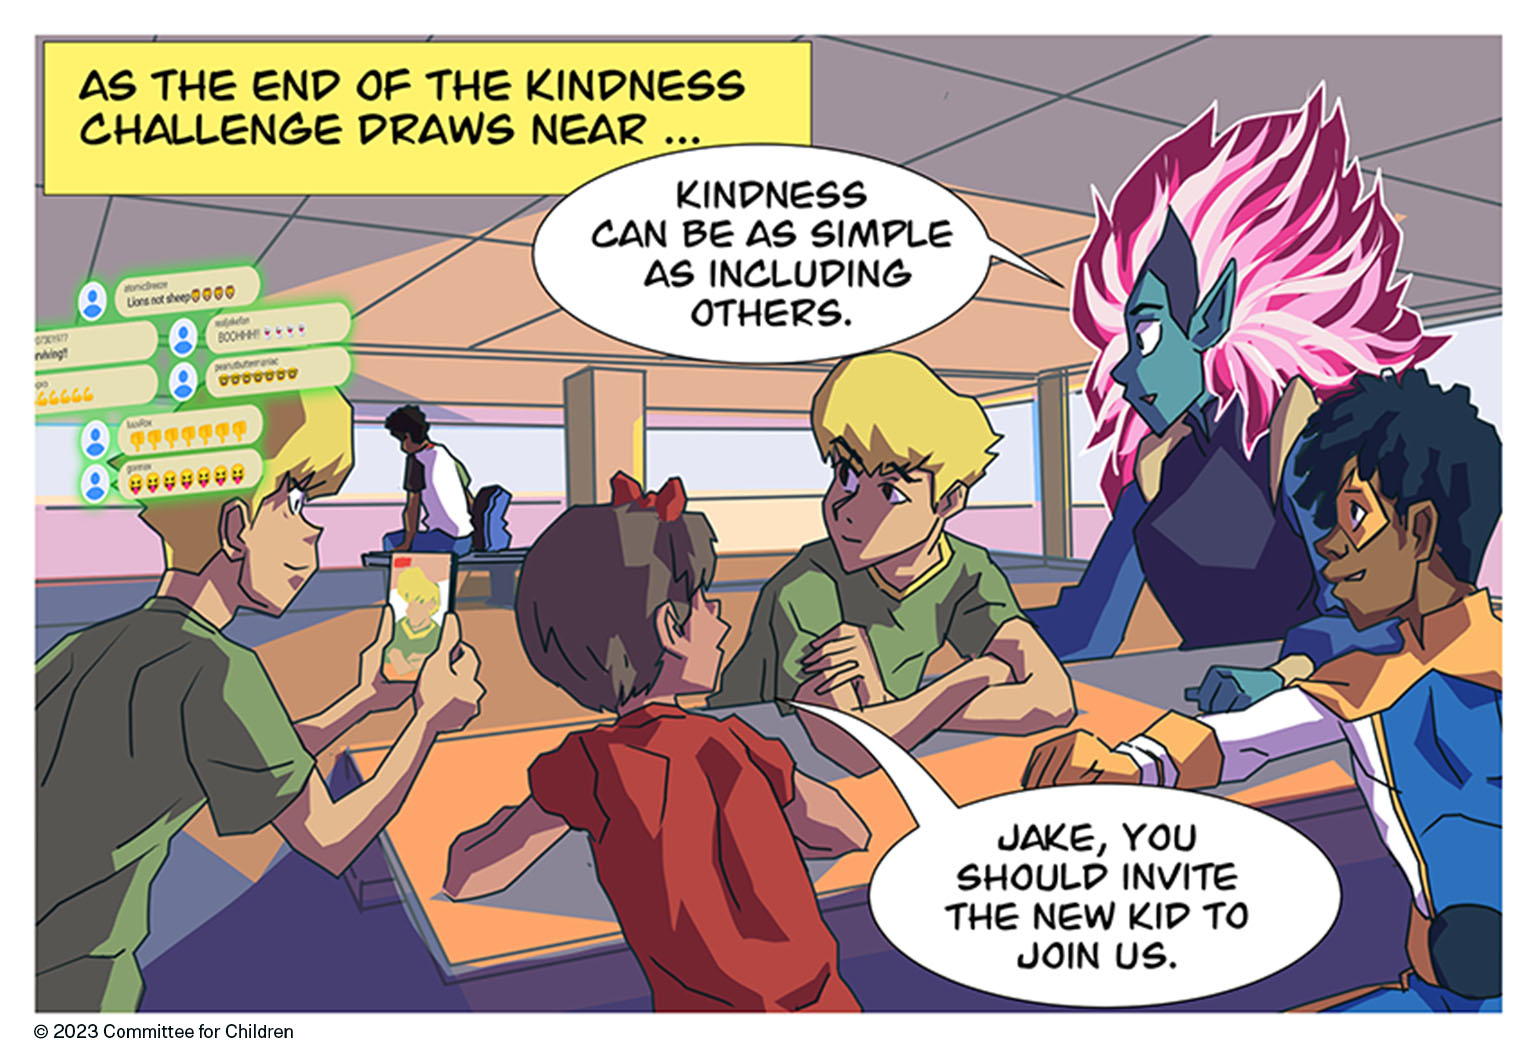 As the end of the kindness challenge draws near, Captain Compassion and upstanders Kid Kinder and Zoey sit around a table and give Jake gentle guidance. 

“Kindness can be as simple as including others,” says Captain Compassion.

“Jake, you should invite the new kid to join us,” Zoey says. 

Jake’s doppelganger sits beside them, looking at his phone.
